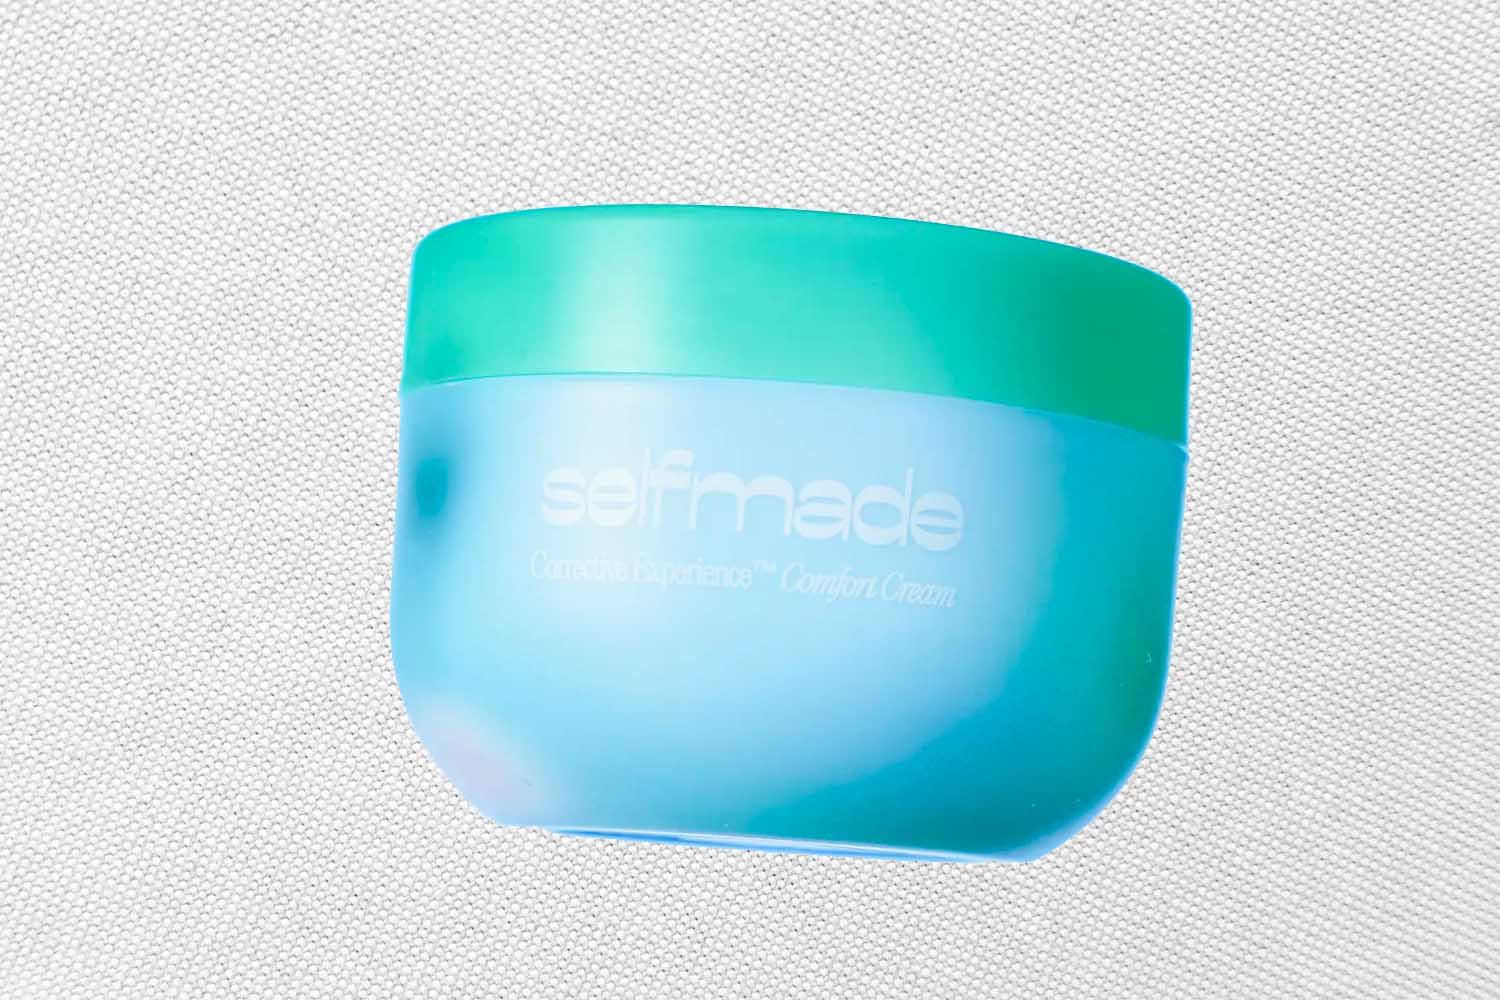 Selfmade Corrective Experience Comfort Cream, one of the best women's gifts to give this September